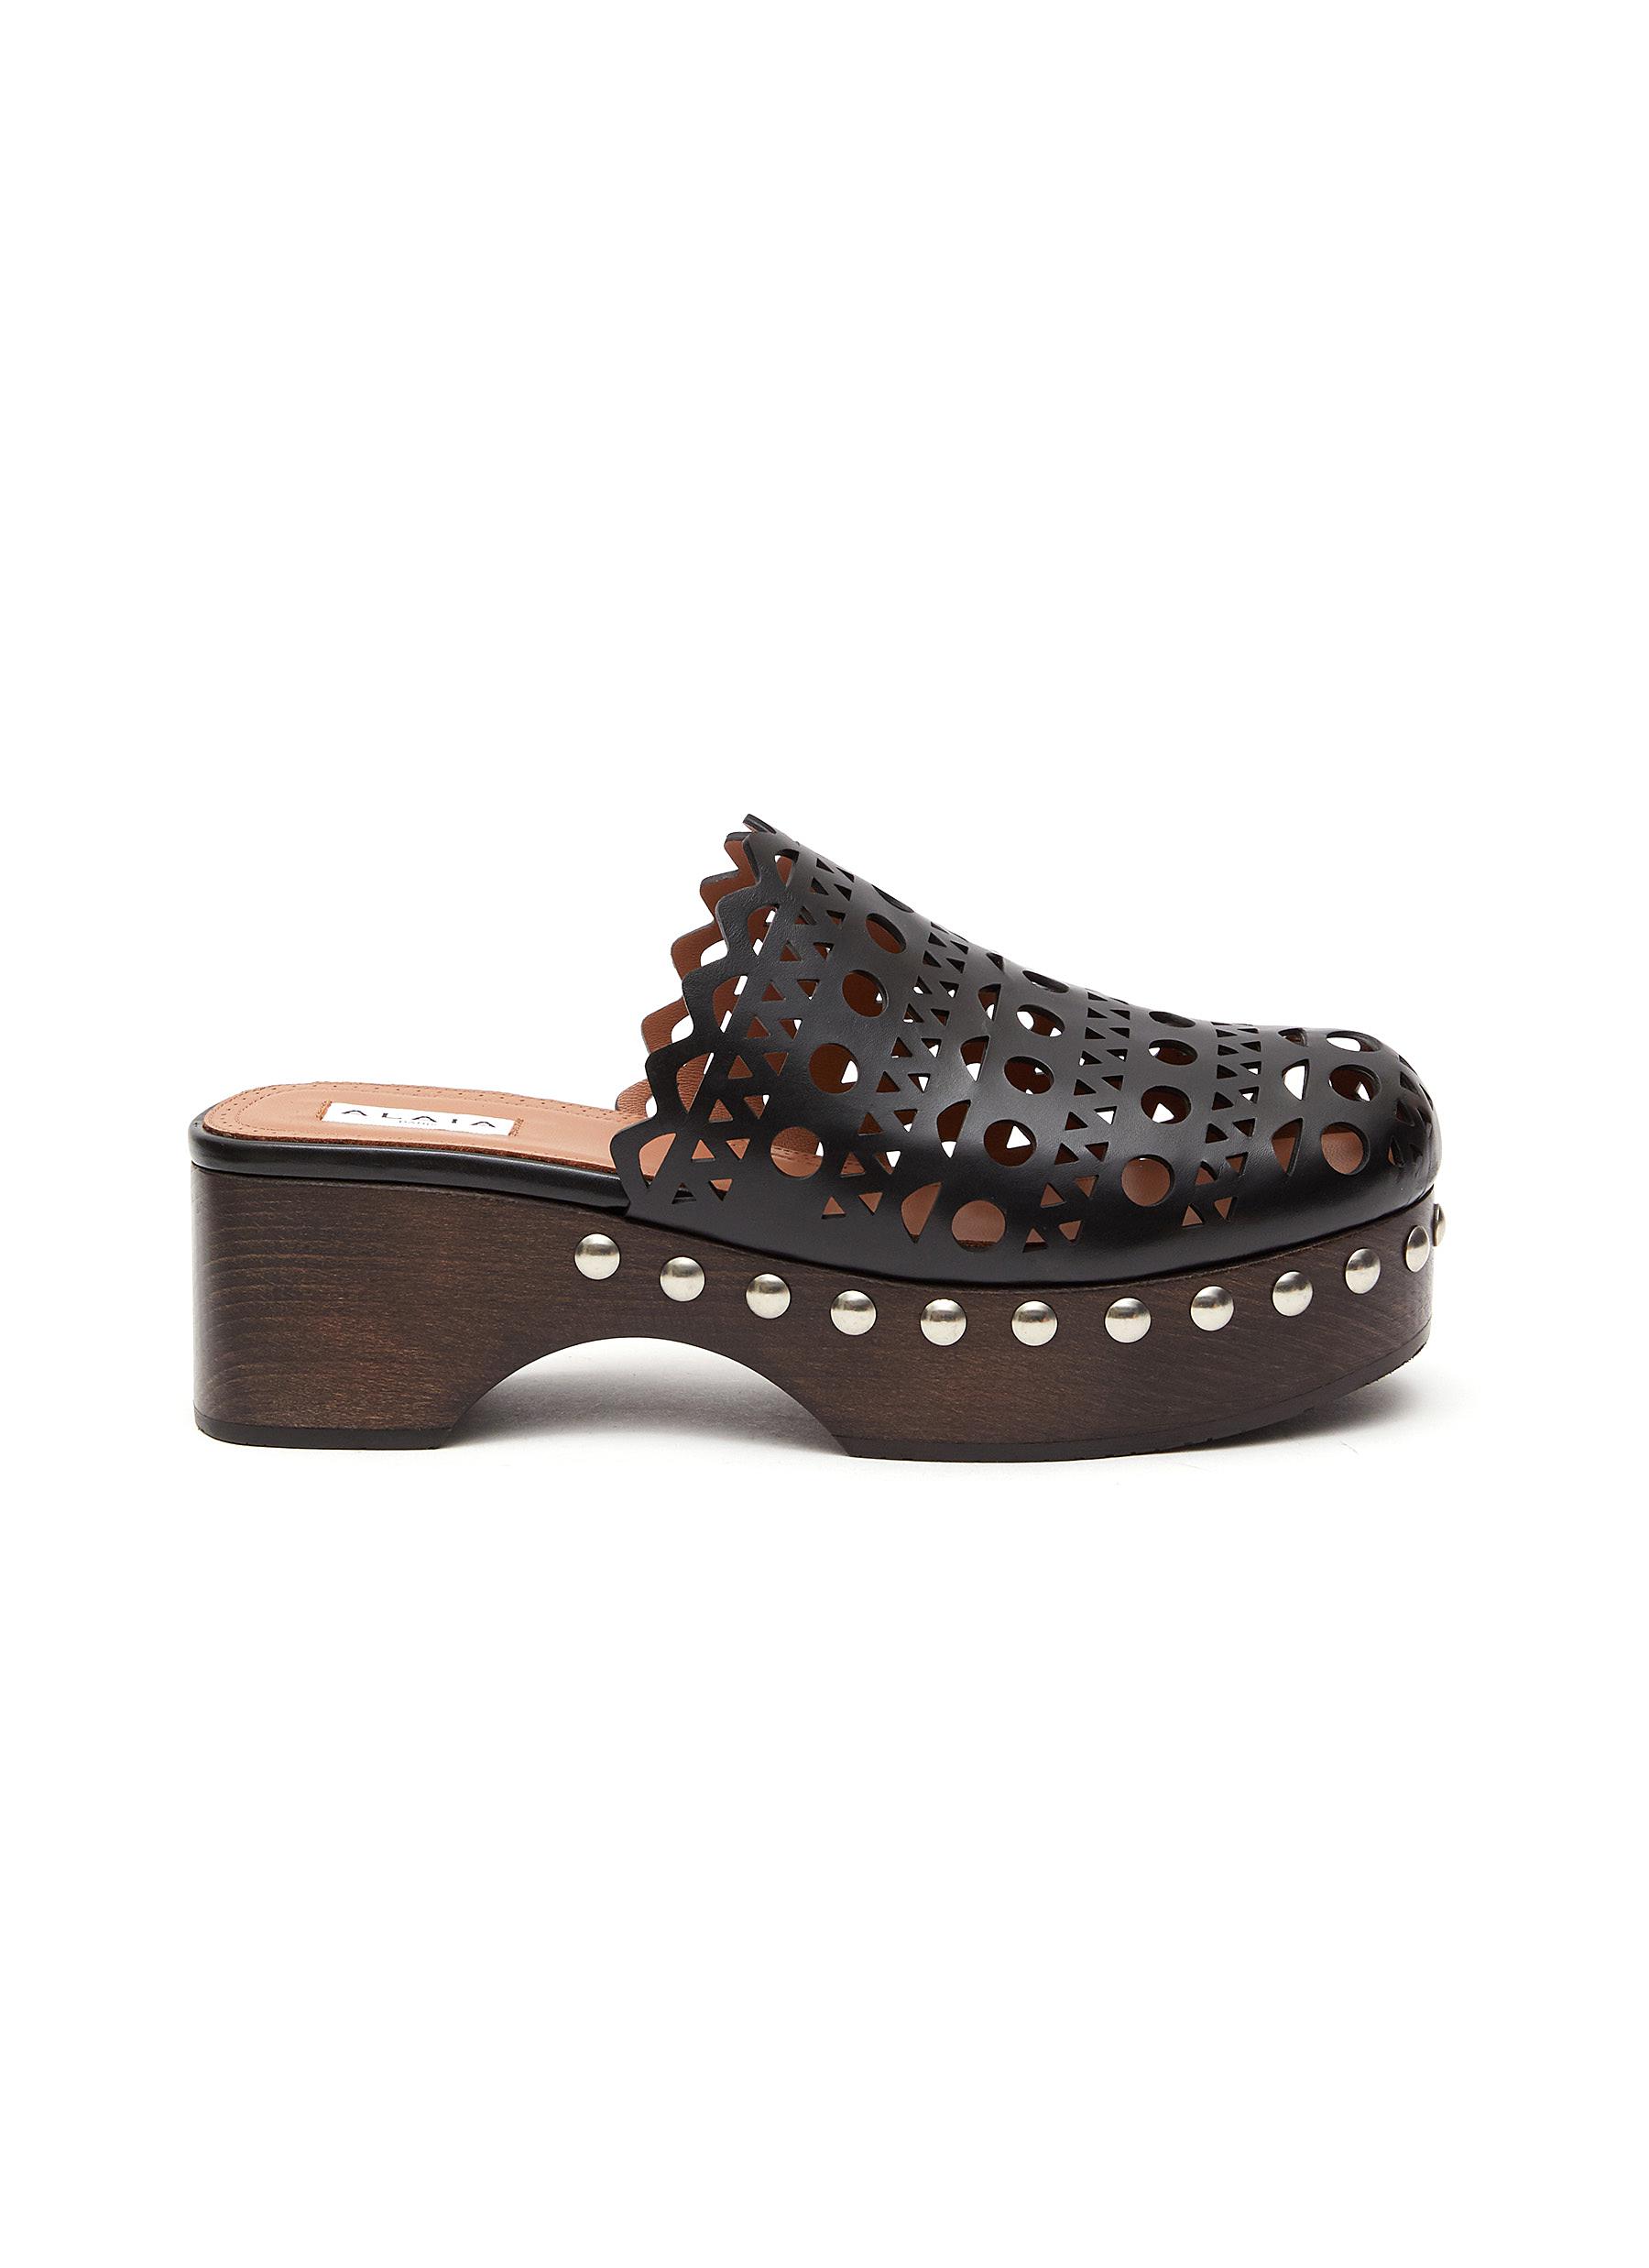 Perforated Calfskin Leather Clogs